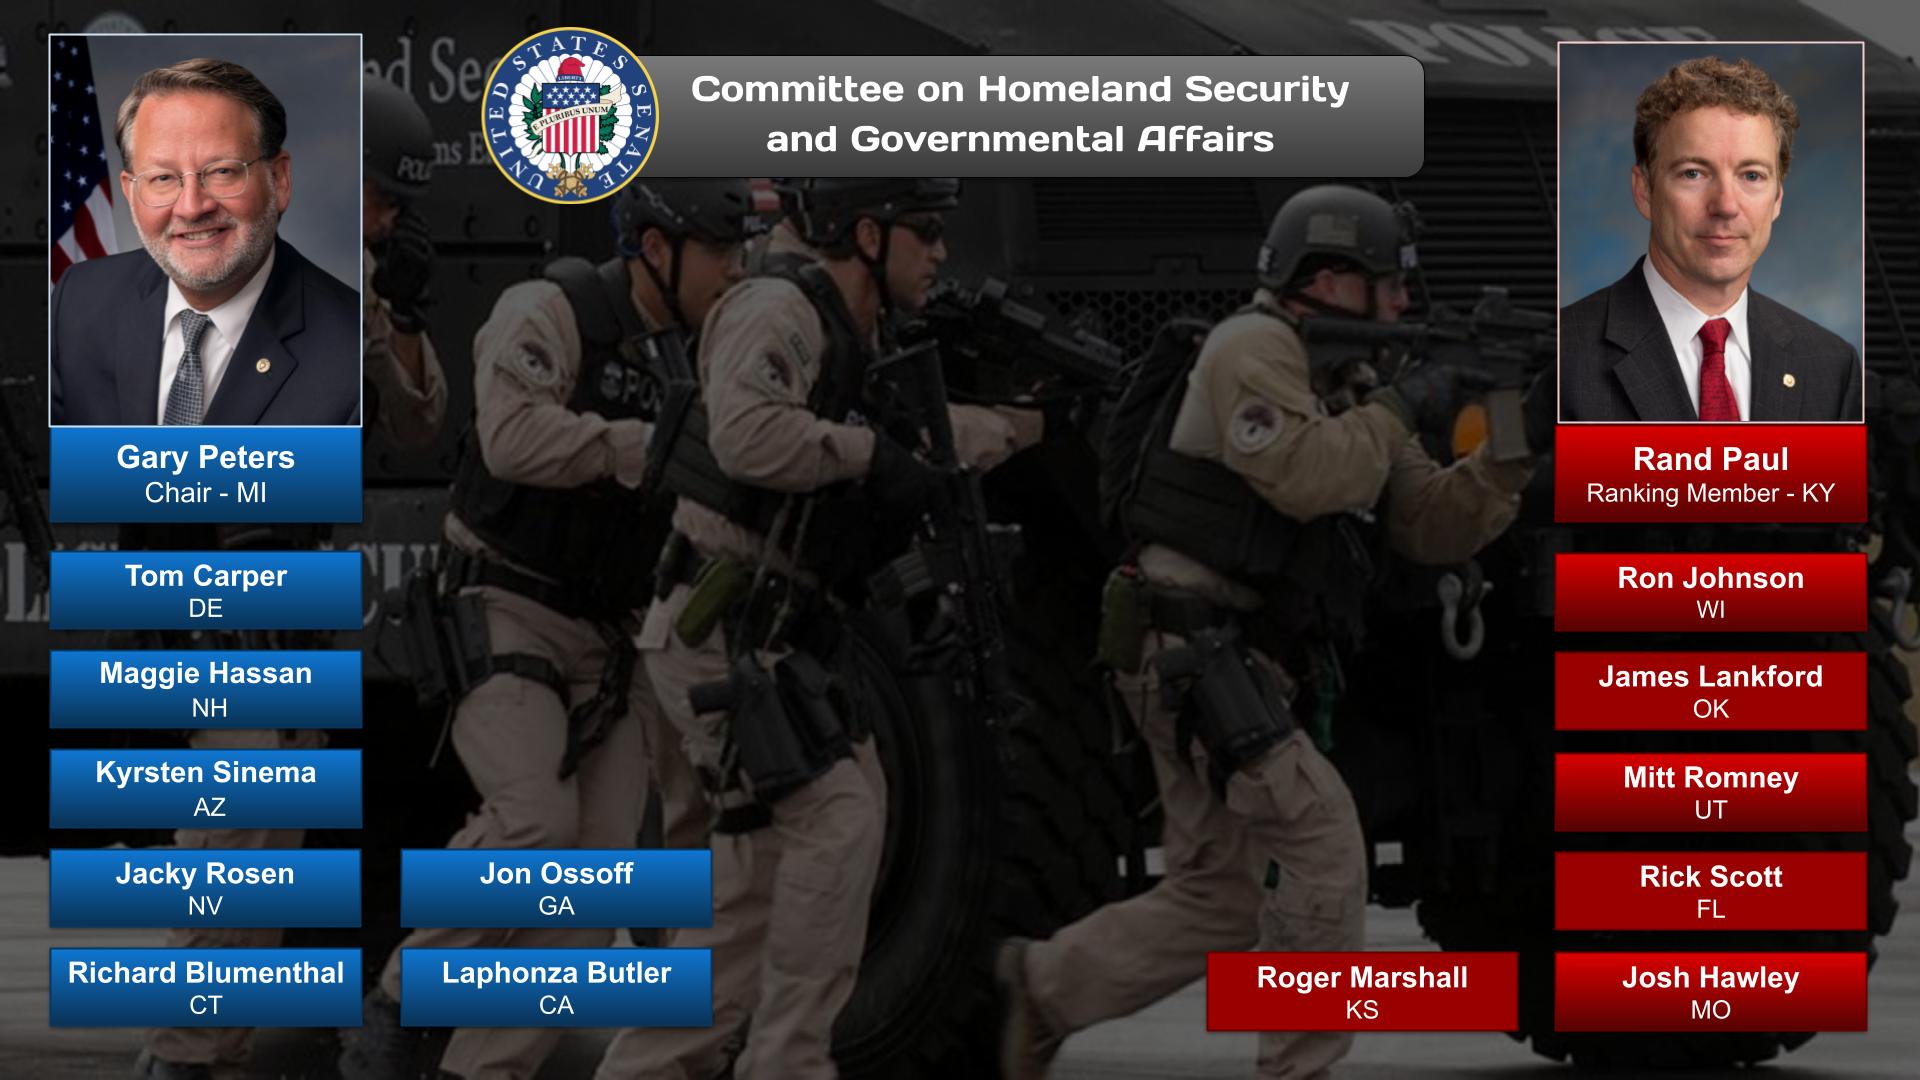 Committee on Homeland Security and Governmental Affairs